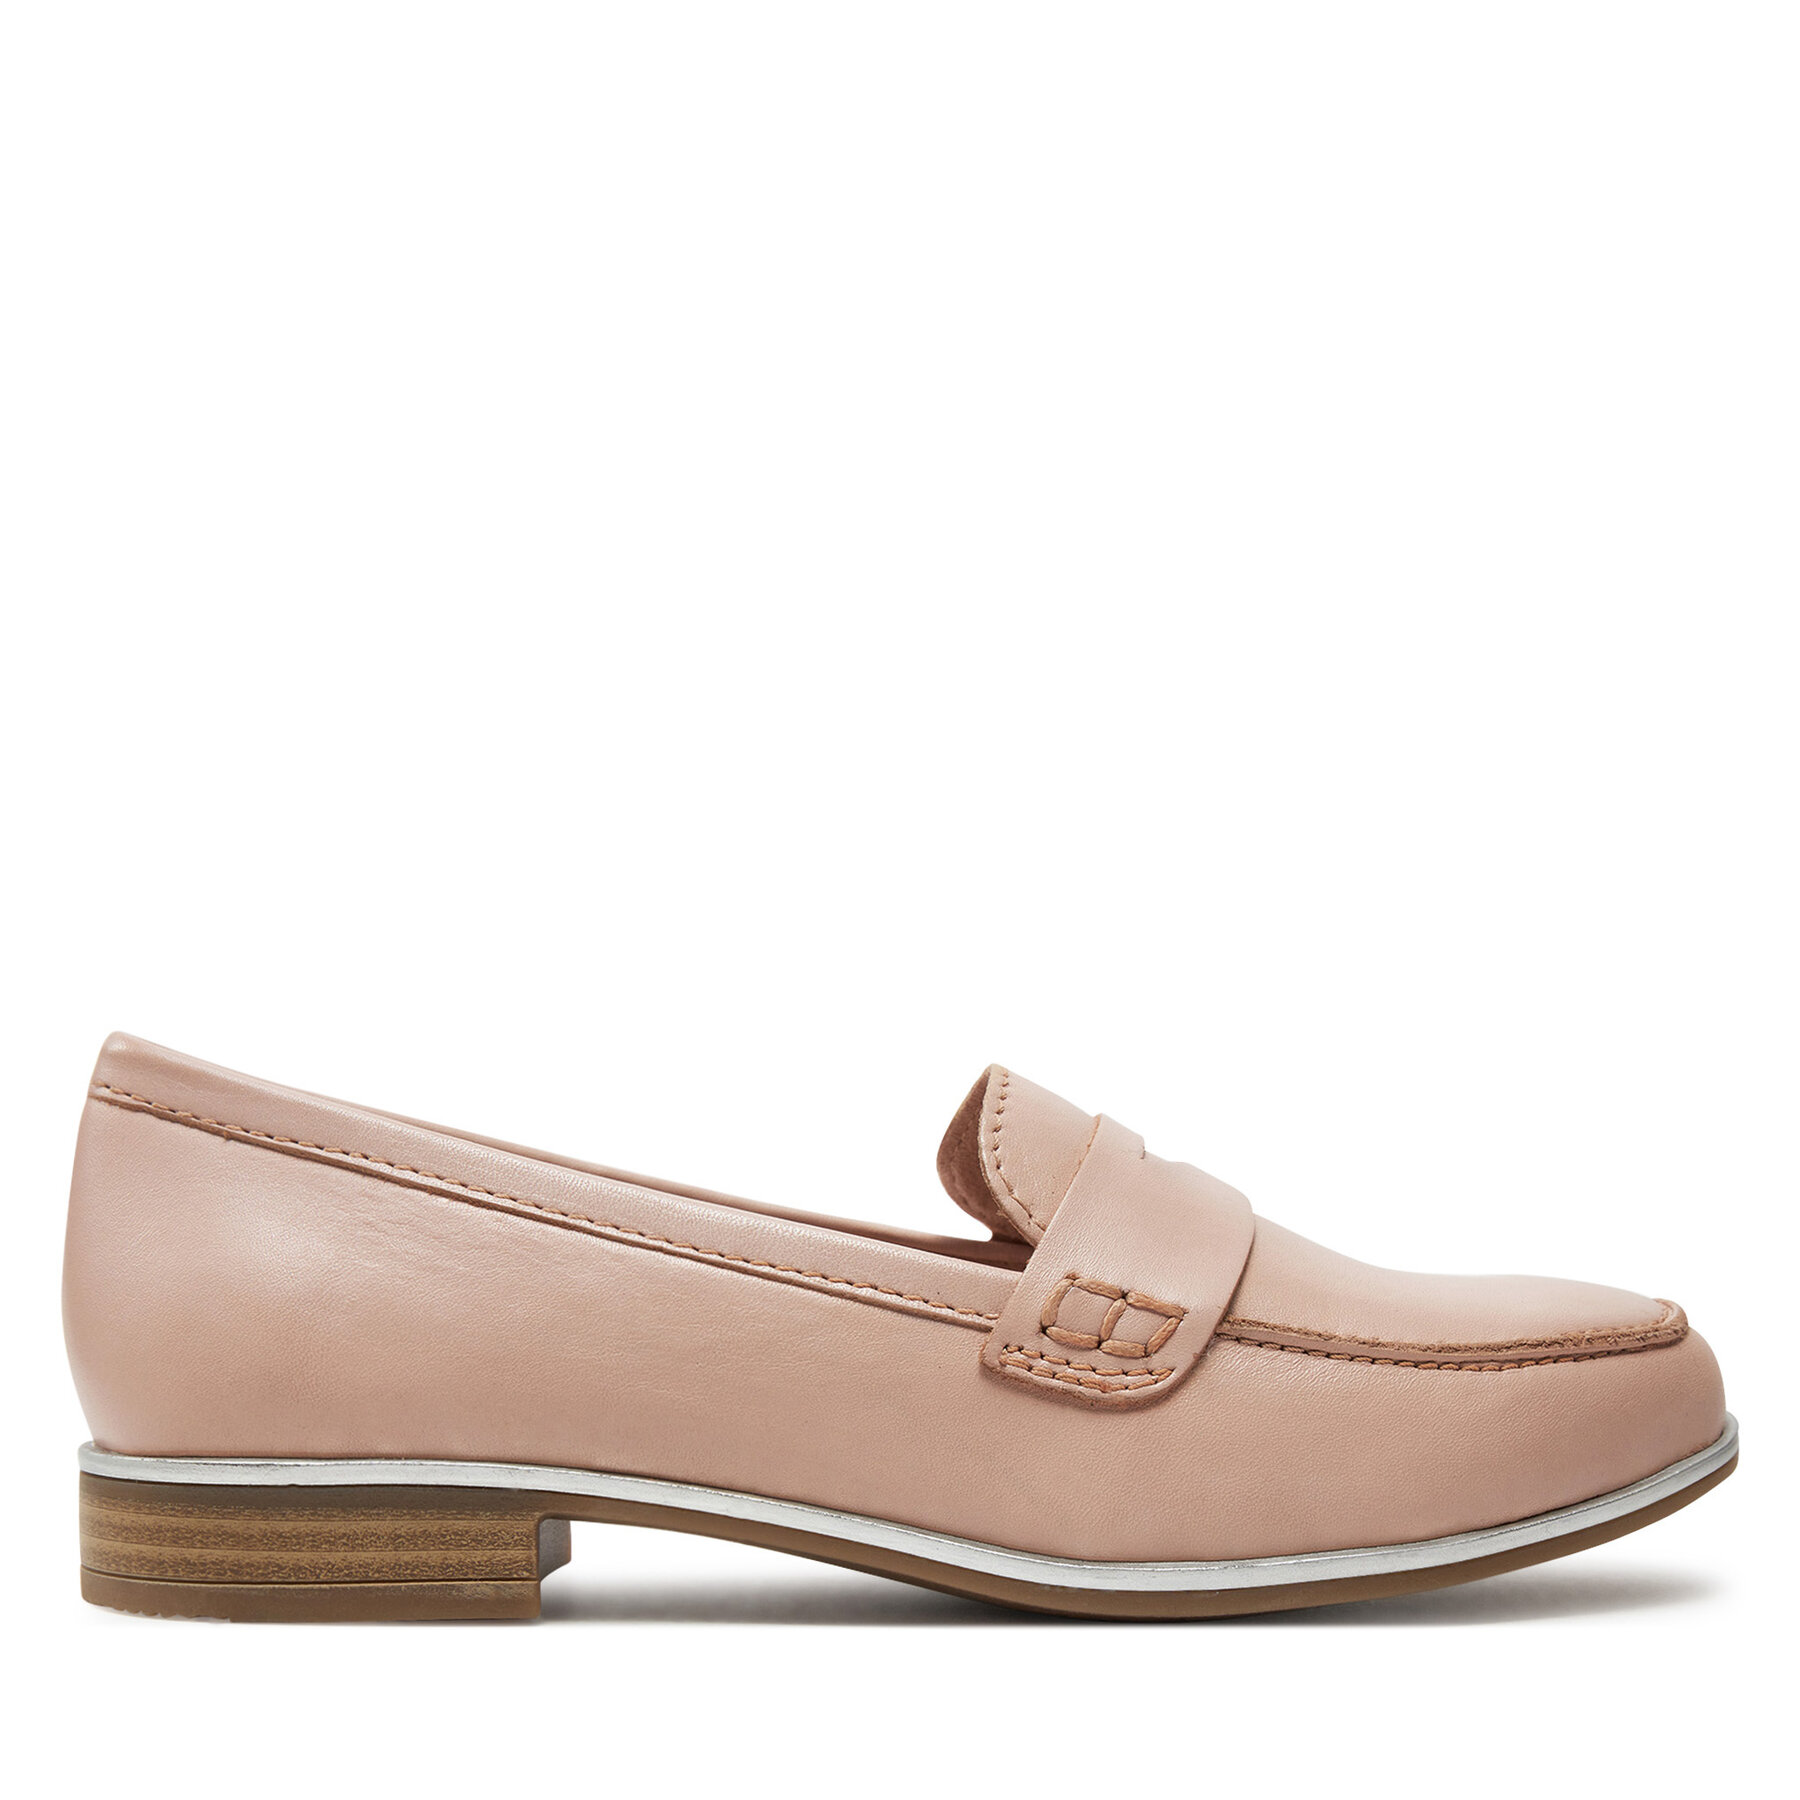 Loaferice Marco Tozzi 2-24205-42 Nude 408